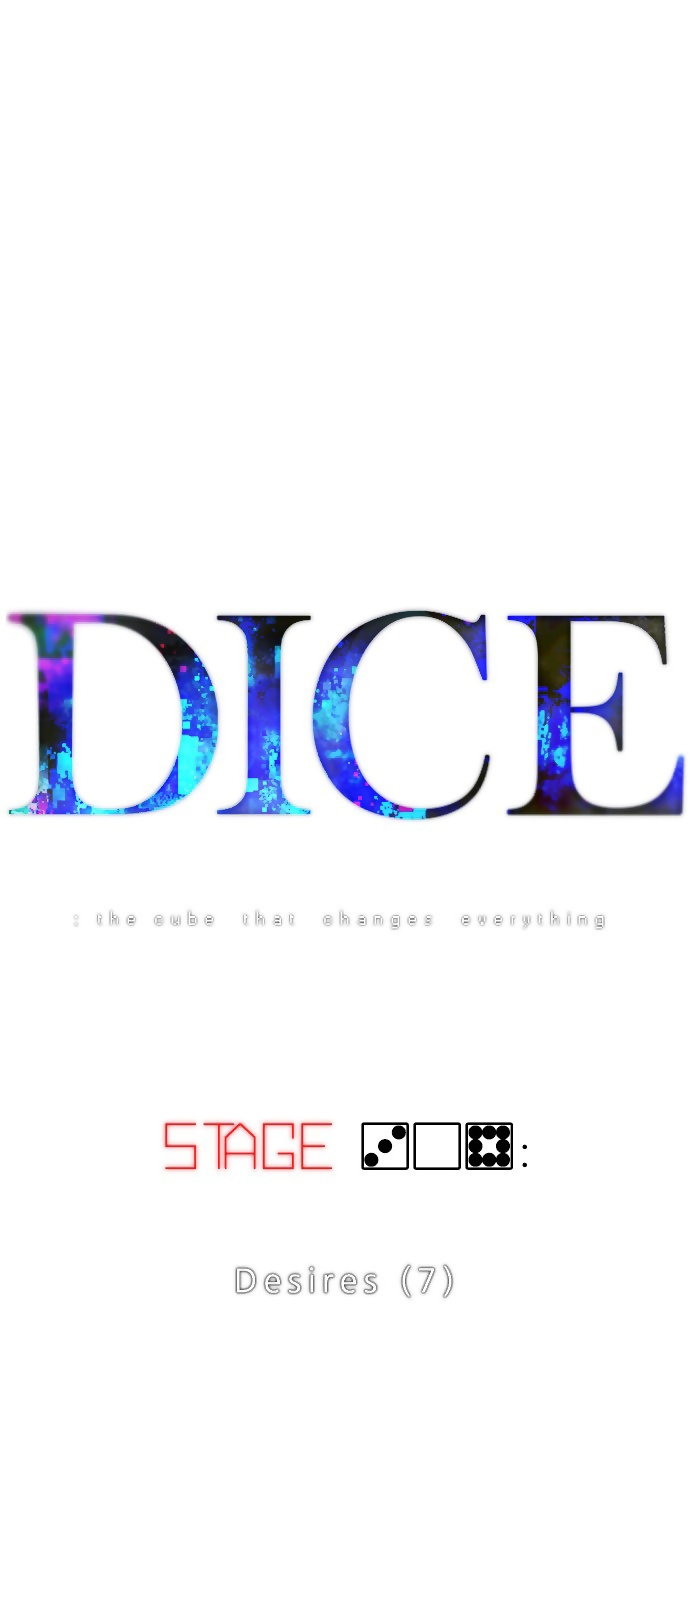 DICE: The Cube That Changes Everything Ch. 308 Desires (7)